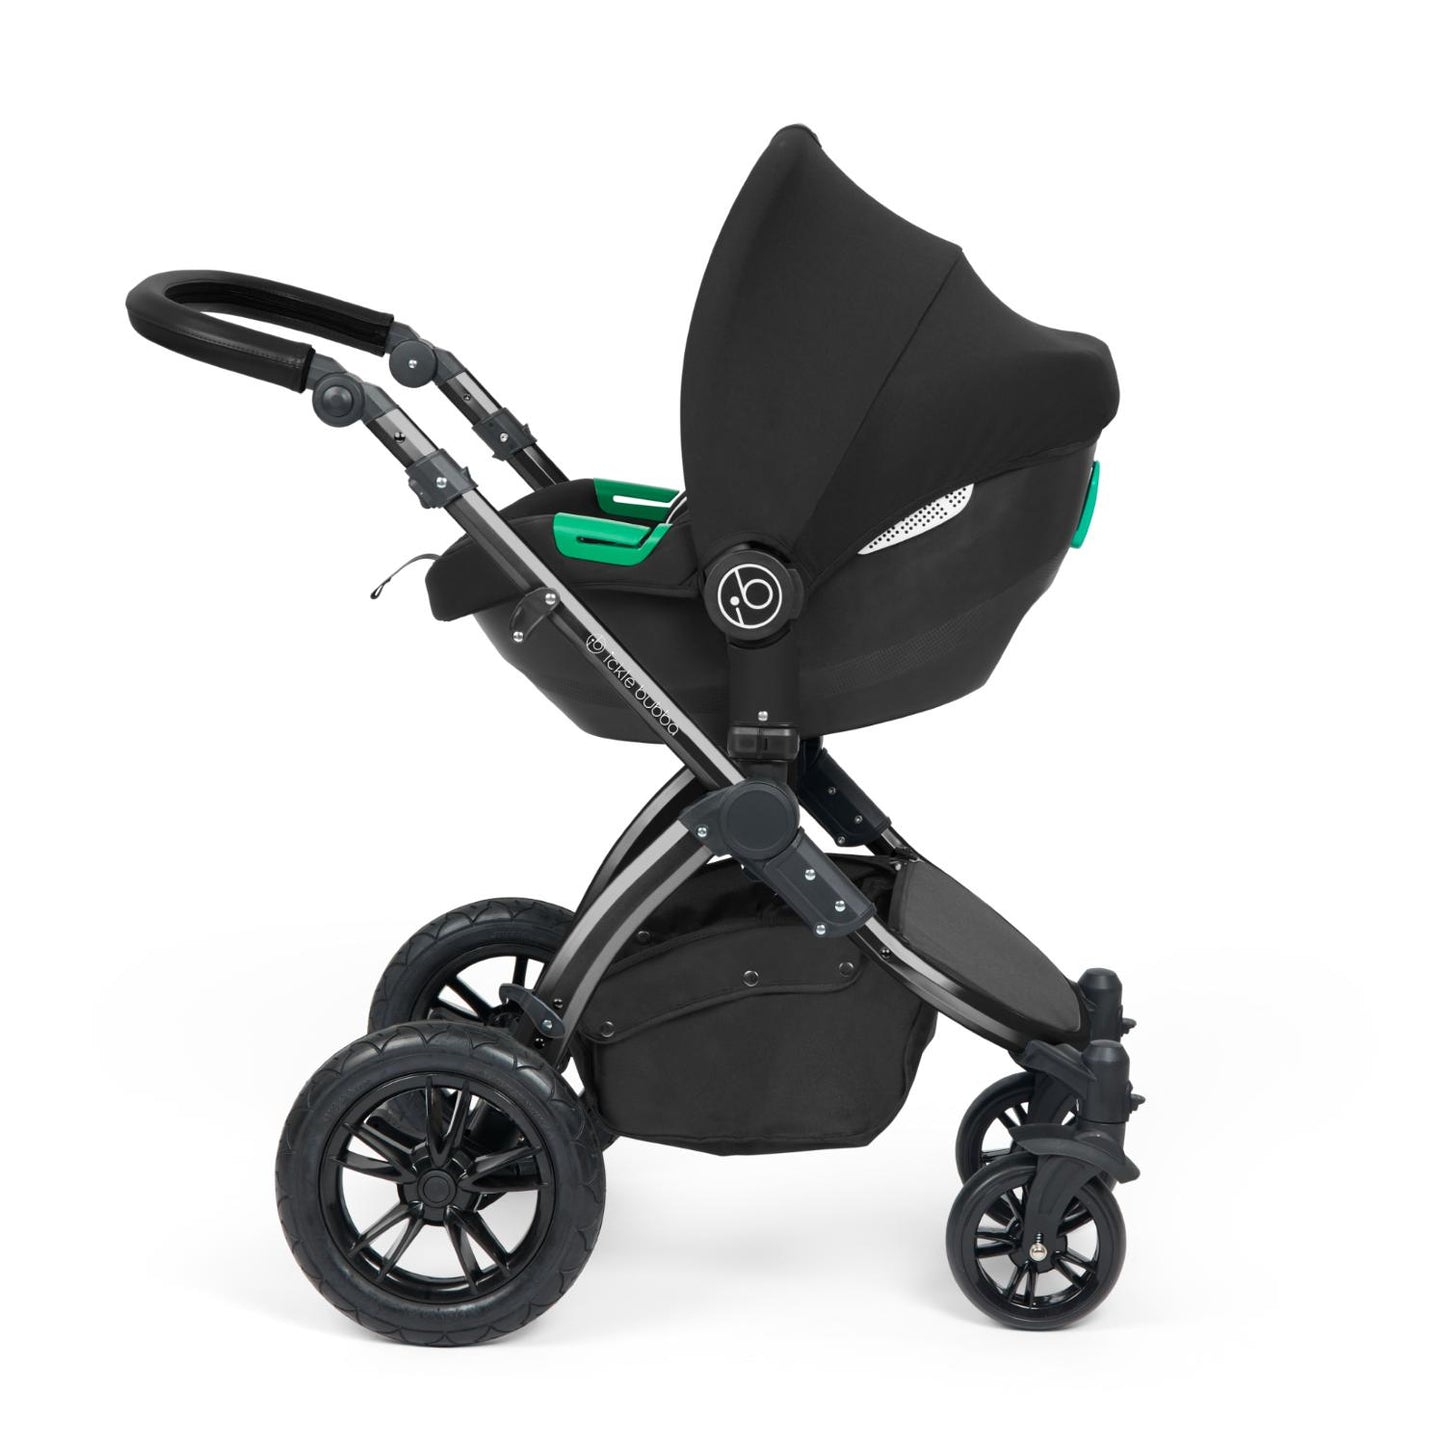 Ickle Bubba Stomp Luxe Pushchair with Cirrus i-Size car seat attached in Charcoal Grey